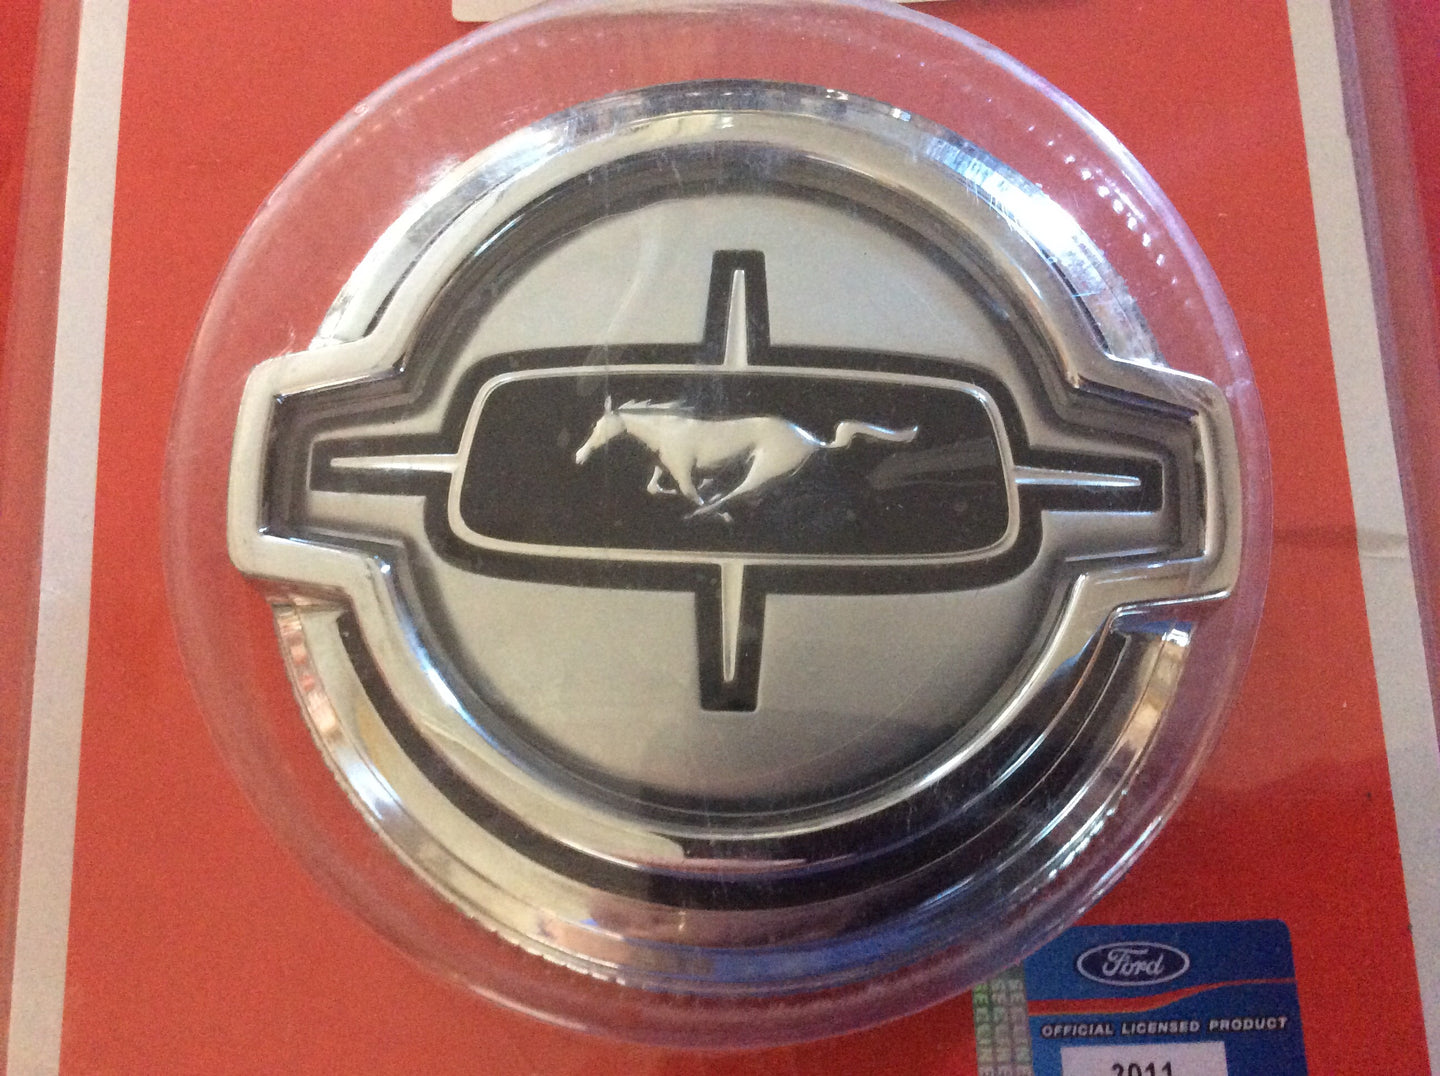 1968 Mustang Standard Gas Cap Twist On with retaining cable